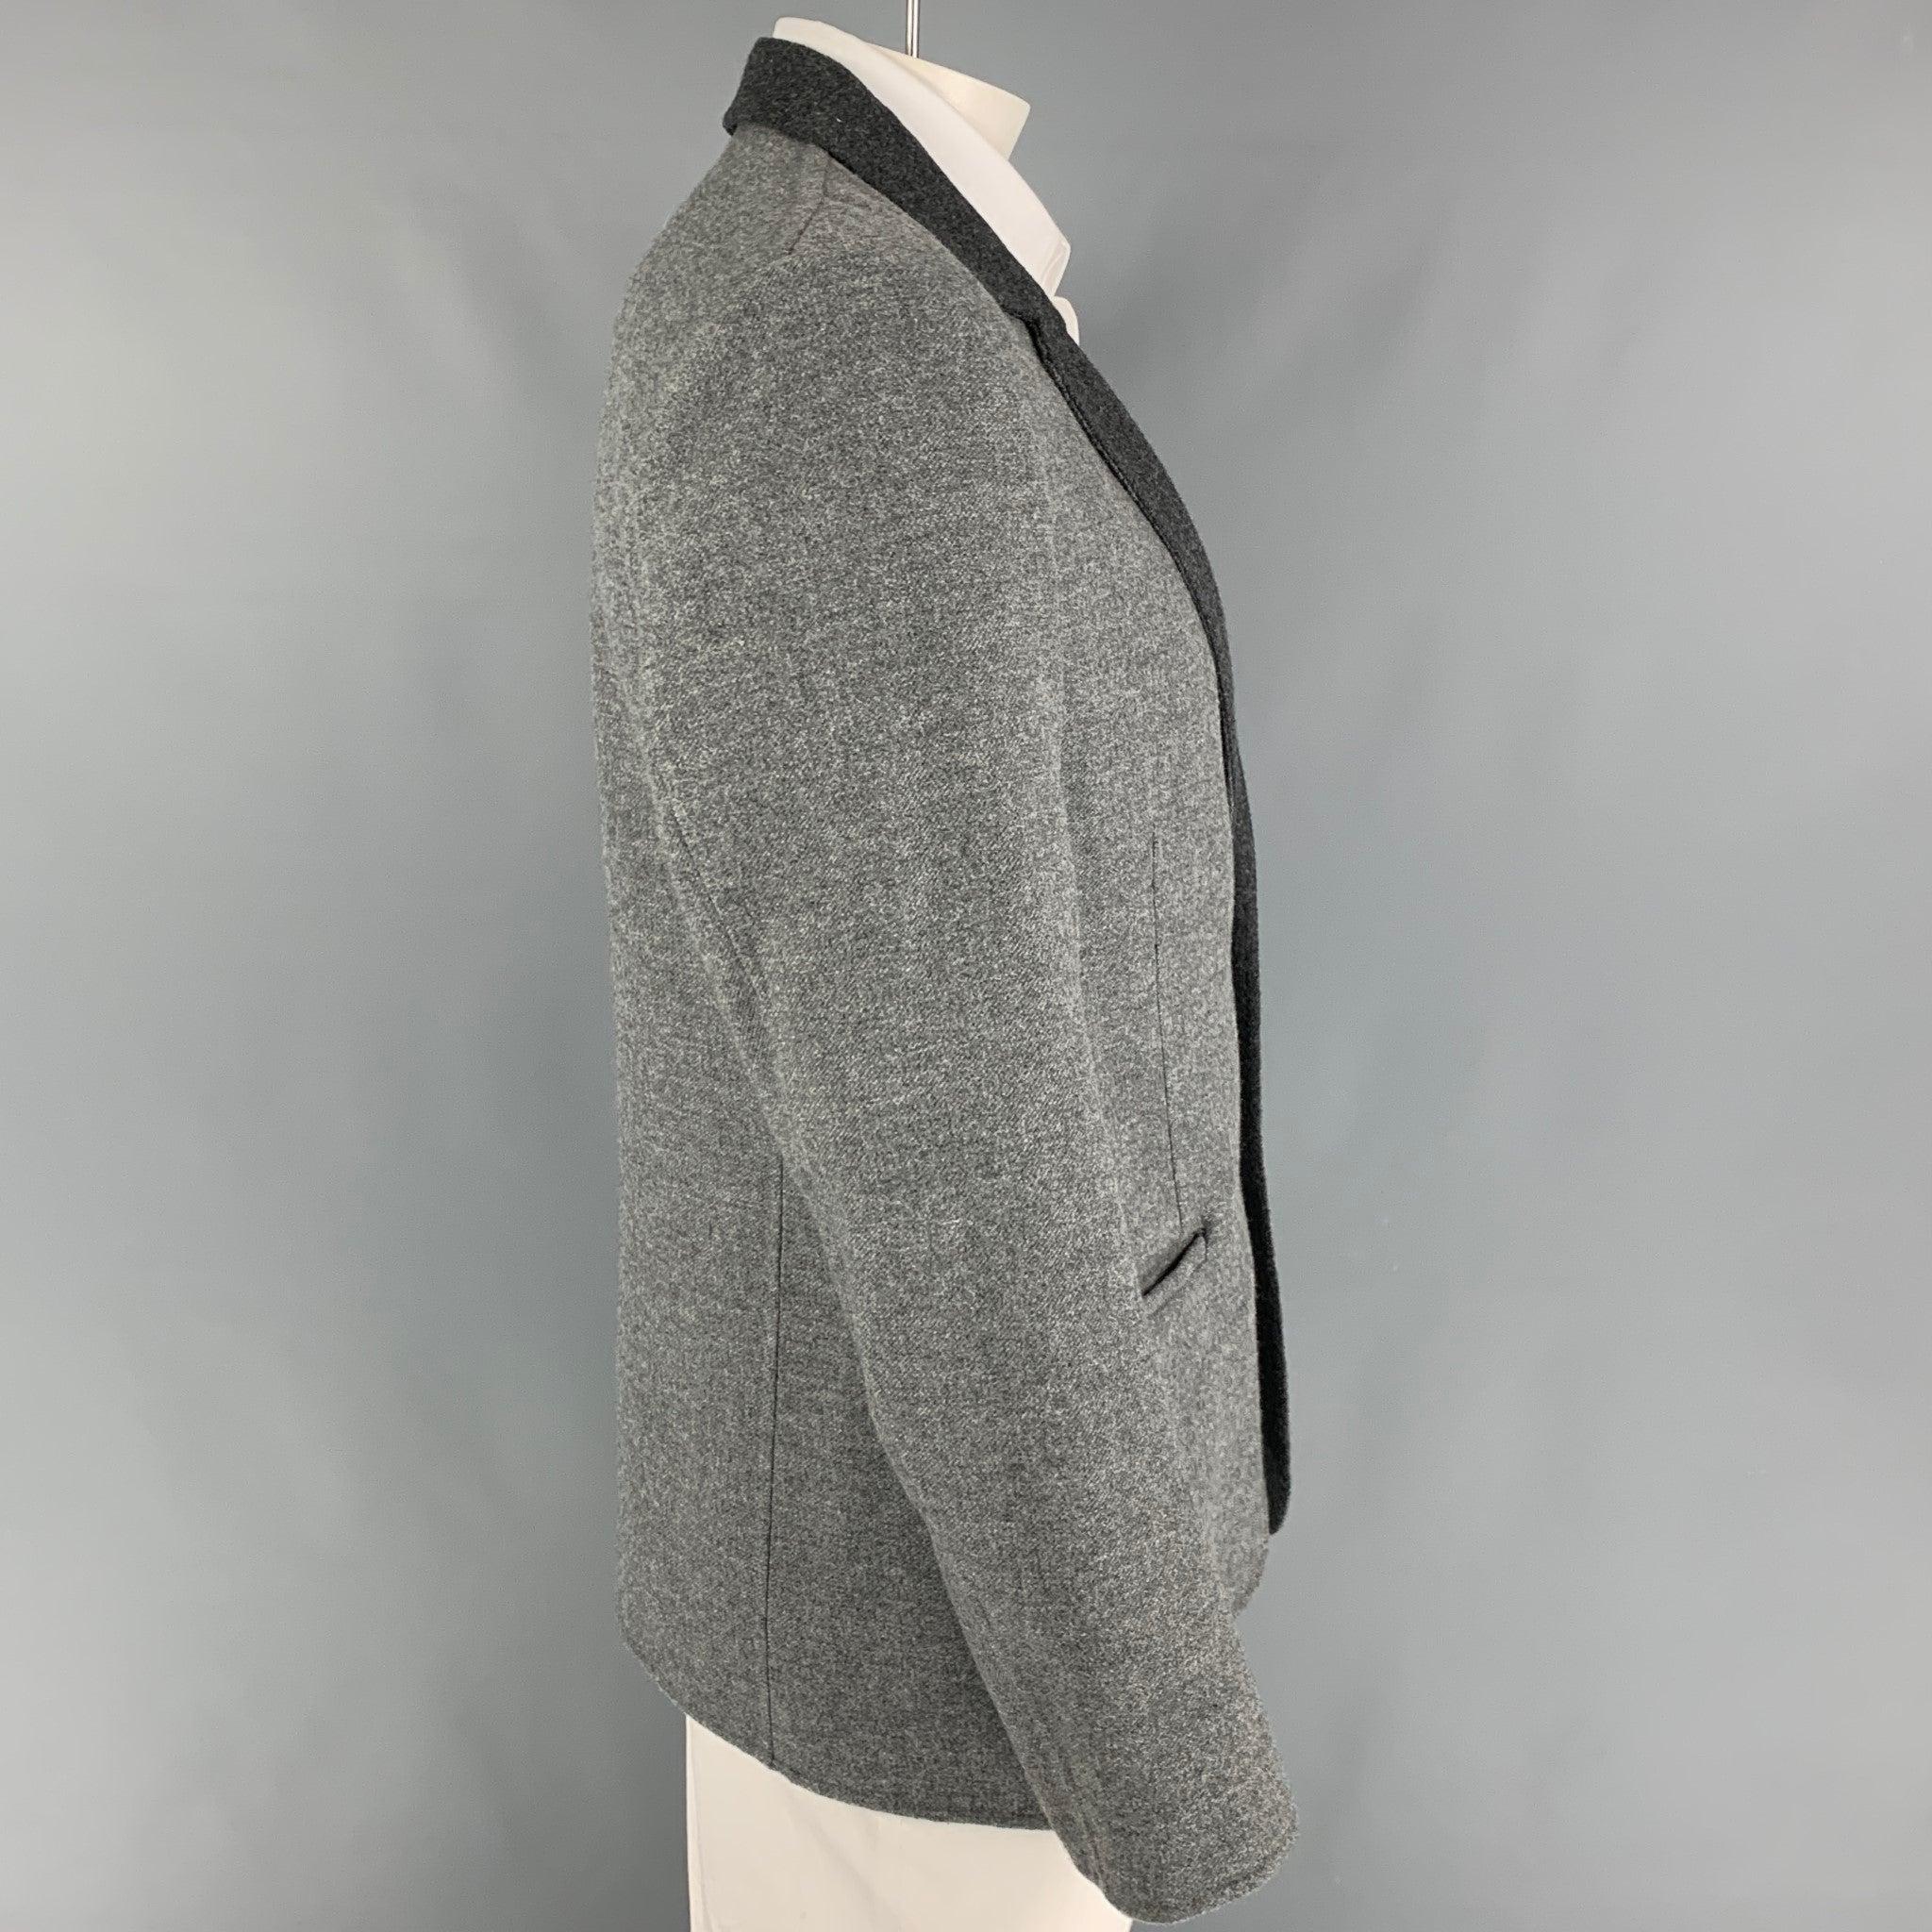 CALVIN KLEIN COLLECTION sport coat comes in a grey & charcoal wool featuring a notch lapel, slit pockets, single back vent, and a double button closure. Made in Italy.
Excellent
Pre-Owned Condition. 

Marked:   52/42 

Measurements: 
 
Shoulder: